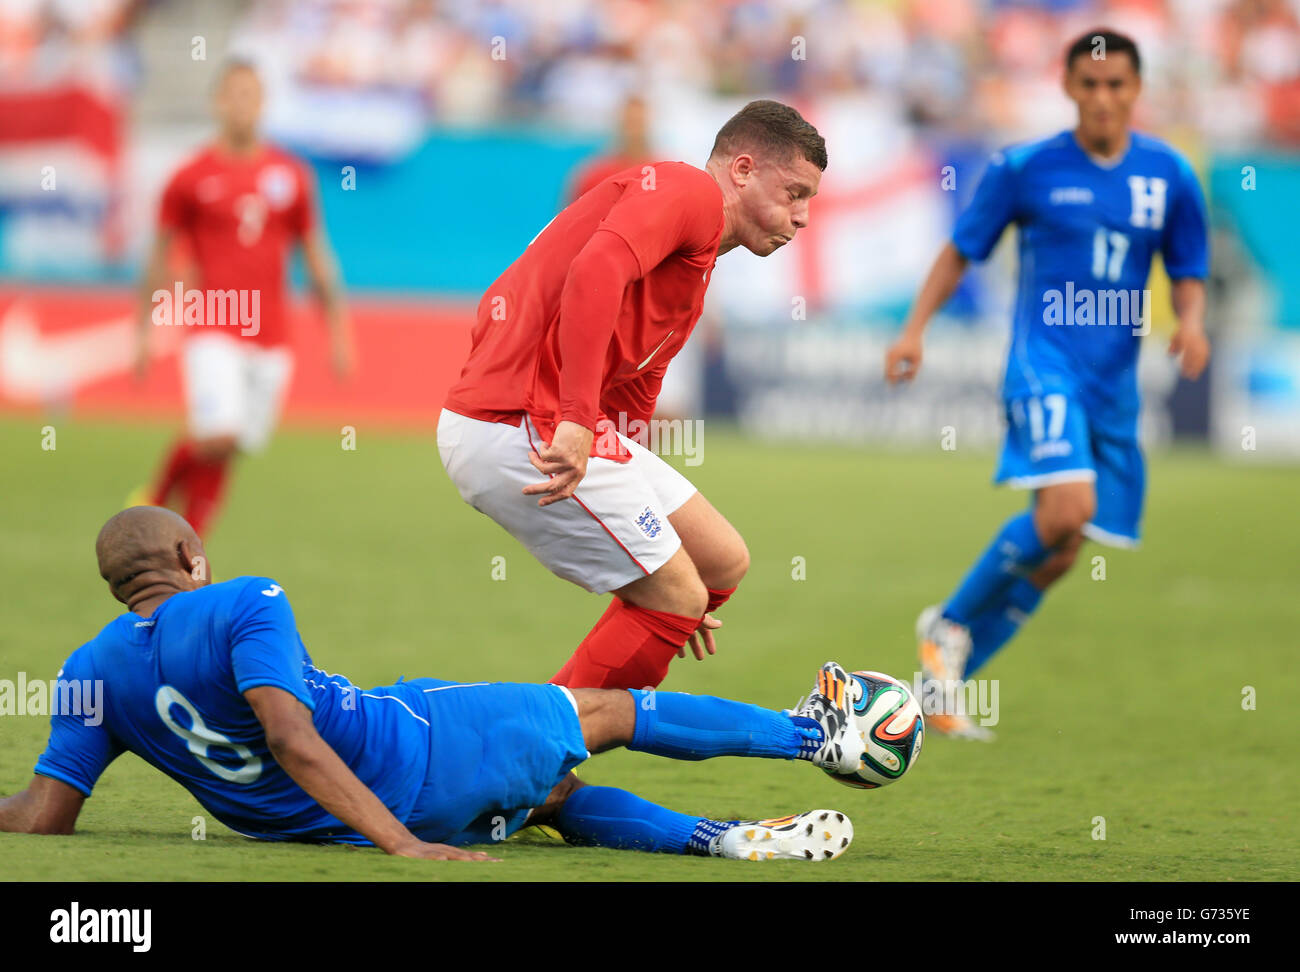 England's Ross Barkley and Honduras' Wilson Palacios (left) battle for the ball during the International Friendly at the Sun Life Stadium, Miami, USA. PRESS ASSOCIATION Photo. Picture date: Saturday June 7, 2014. See PA story SOCCER England. Photo credit should read: Mike Egerton/PA Wire. RESTRICTIONS: Use subject to FA restrictions. Commercial use only with prior written consent of the FA. No editing except cropping. Call +44 (0)1158 447447 or see www.paphotos.com/info/ for full restrictions and further information. Stock Photo